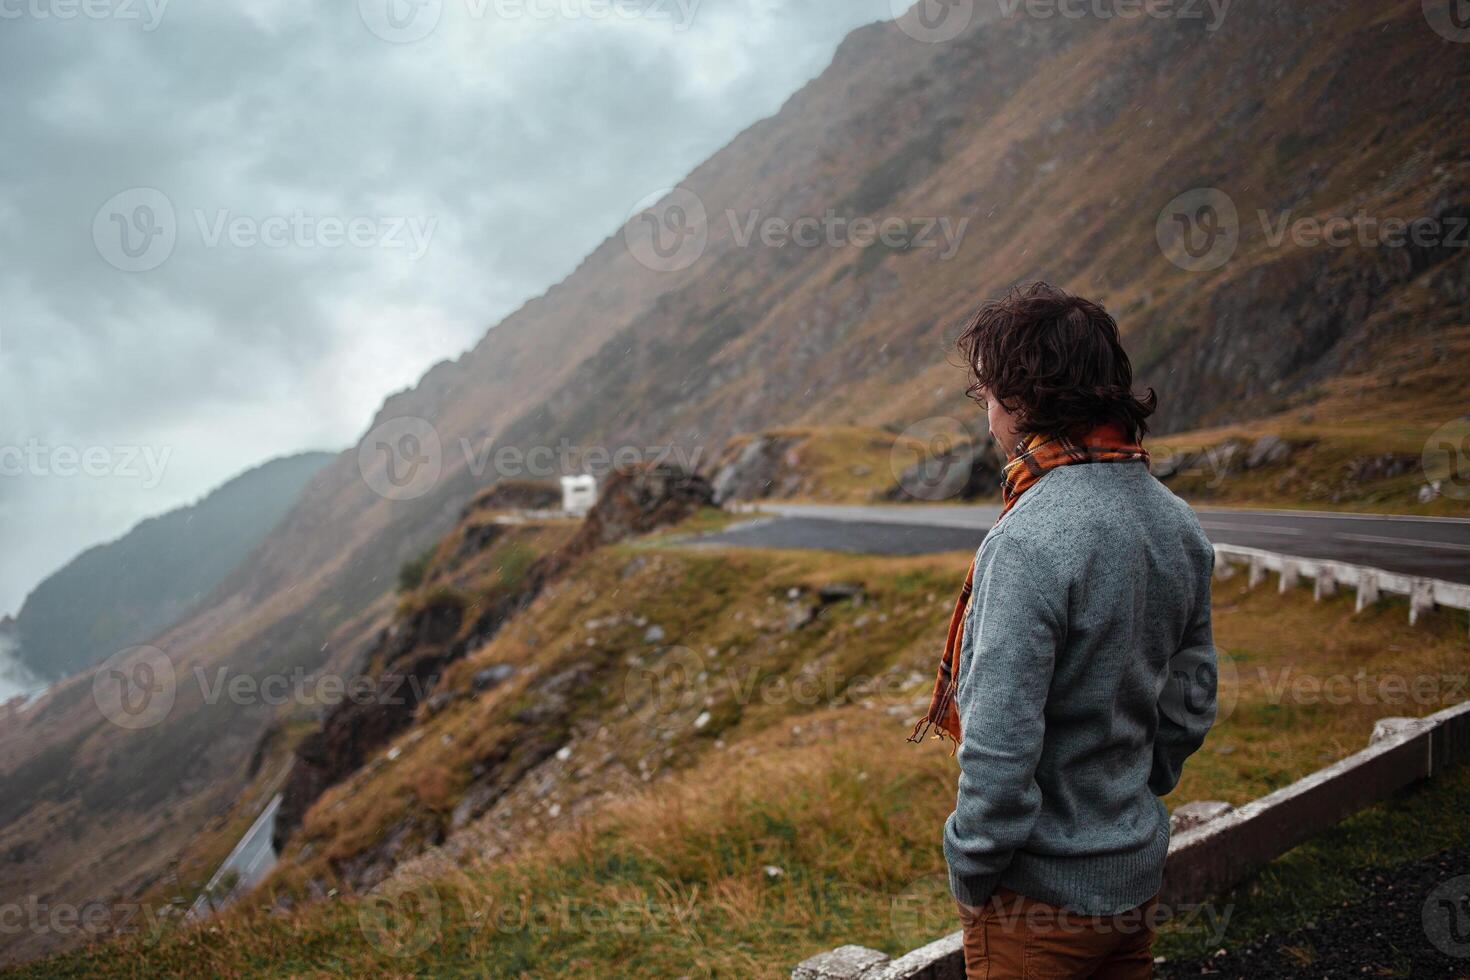 man stands on road in mountains in Romania, Carpathians. concept of loneliness, freedom, melancholy and thoughtfulness. Autumn, rain and fog, nature, outdoors. Man and nature, landscape, cold. photo